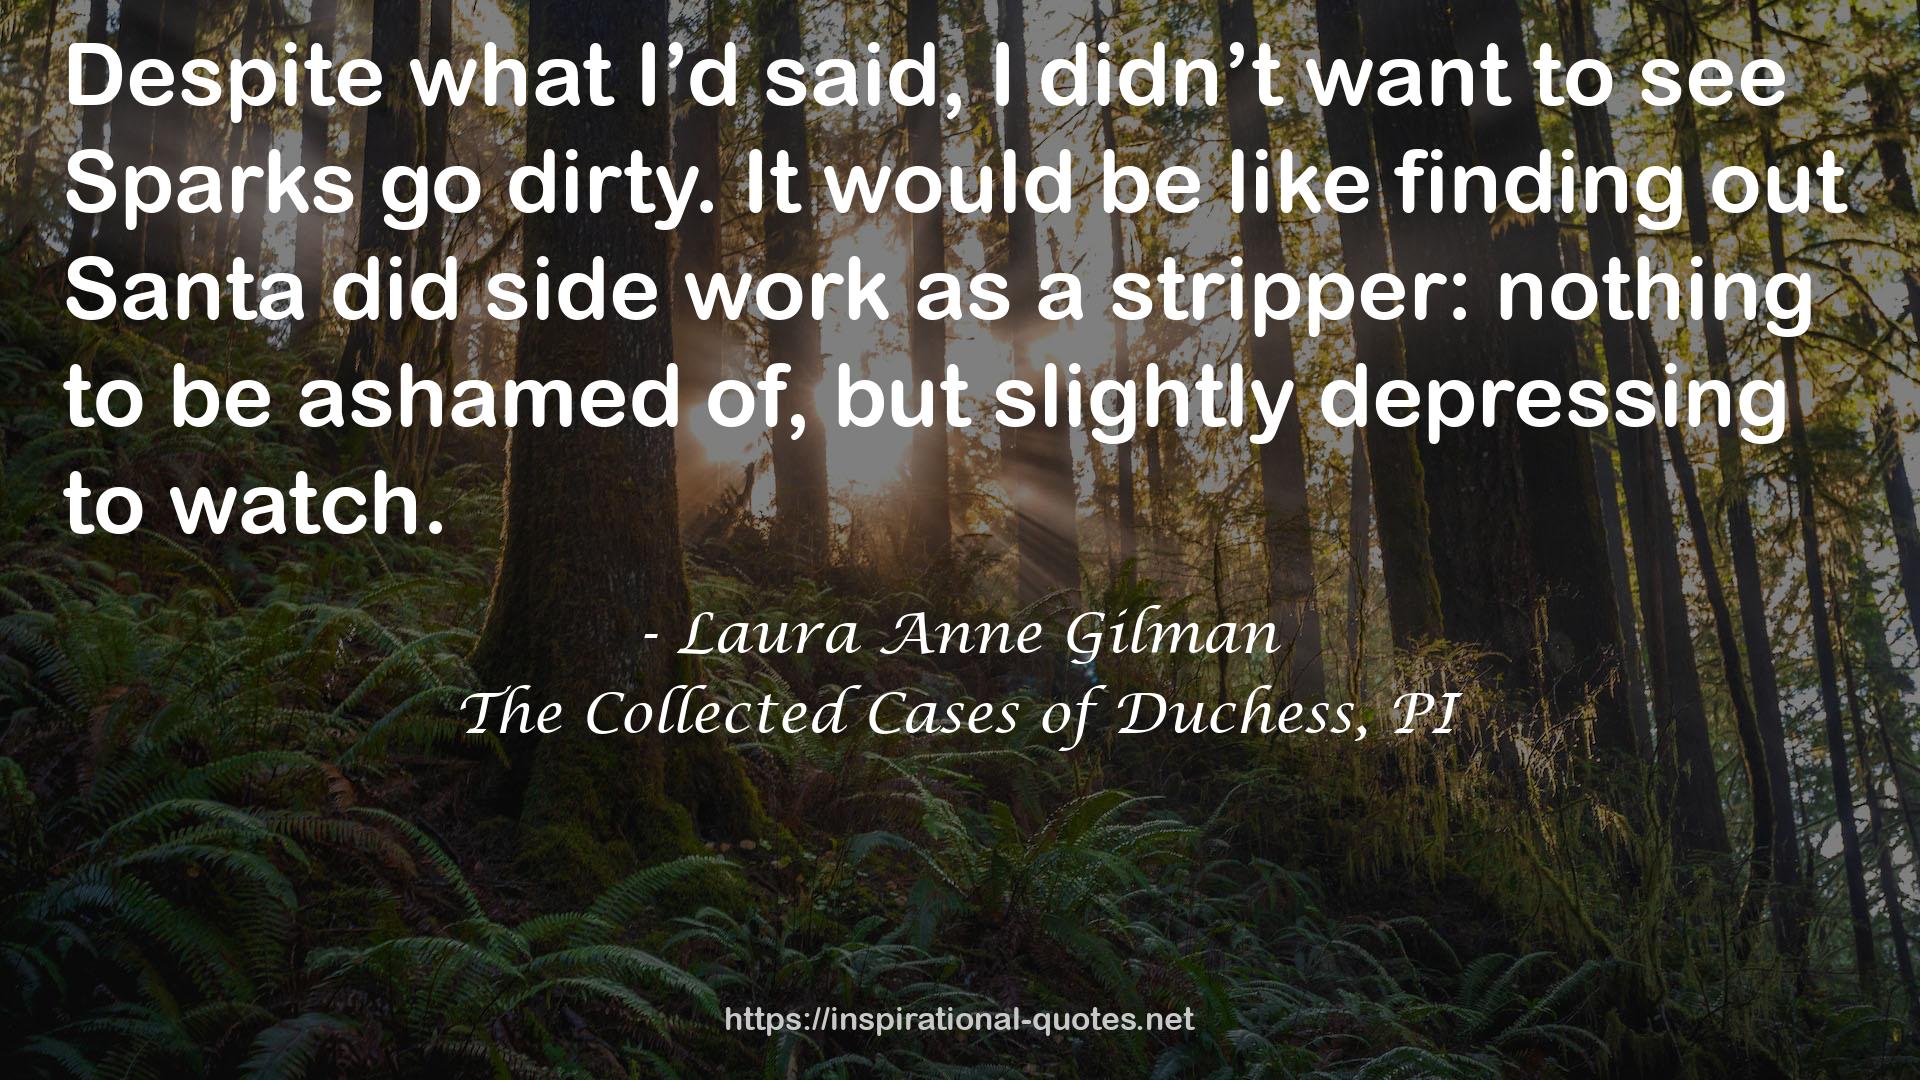 The Collected Cases of Duchess, PI QUOTES